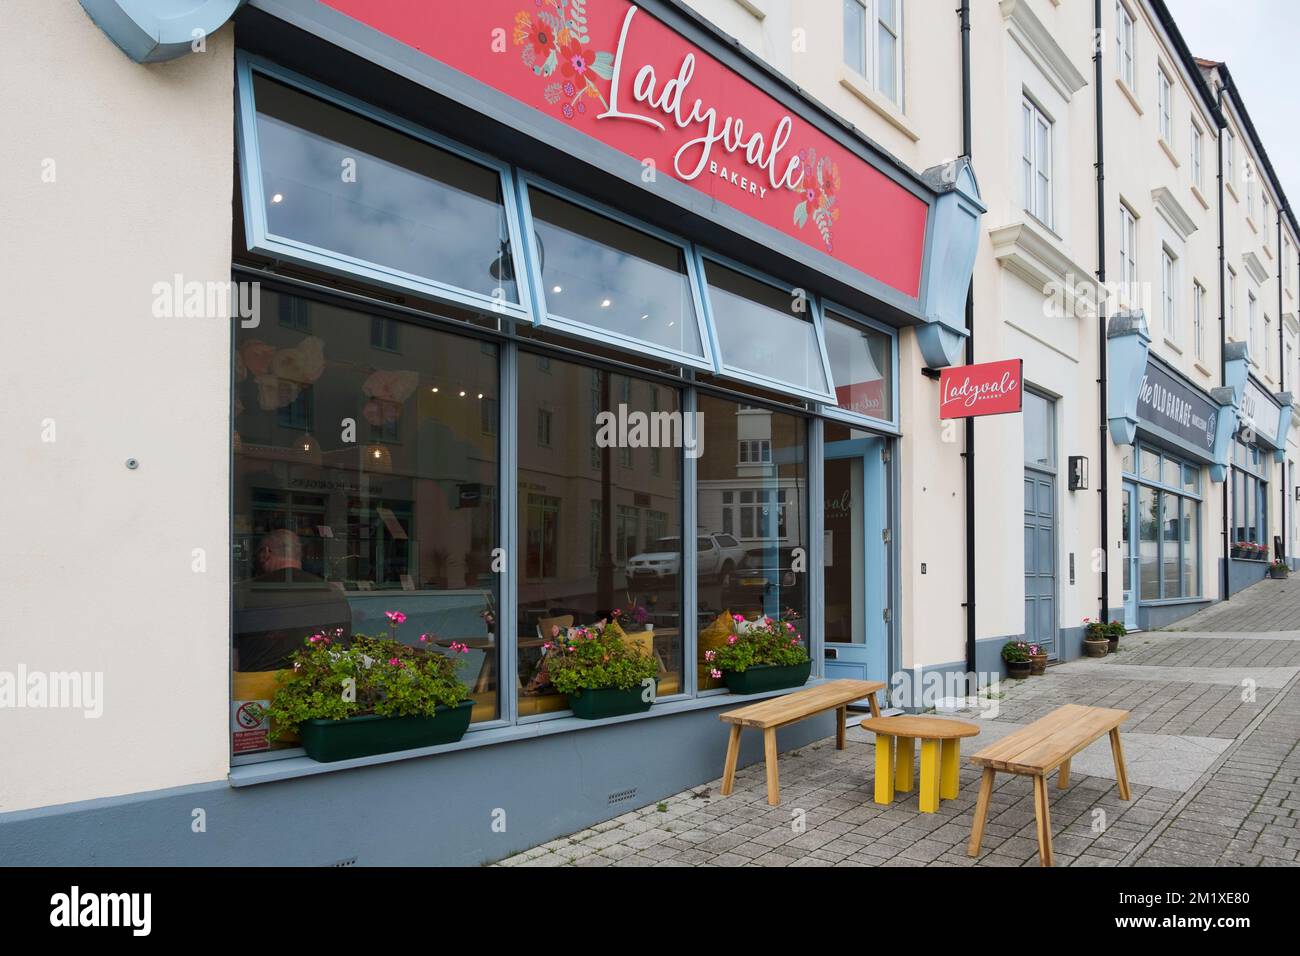 Ladyvale bakery & cafe in Nansledan, a sustainable, eco housing development by the Duchy of Cornwall in Newquay, Cornwall, South West England, UK Stock Photo